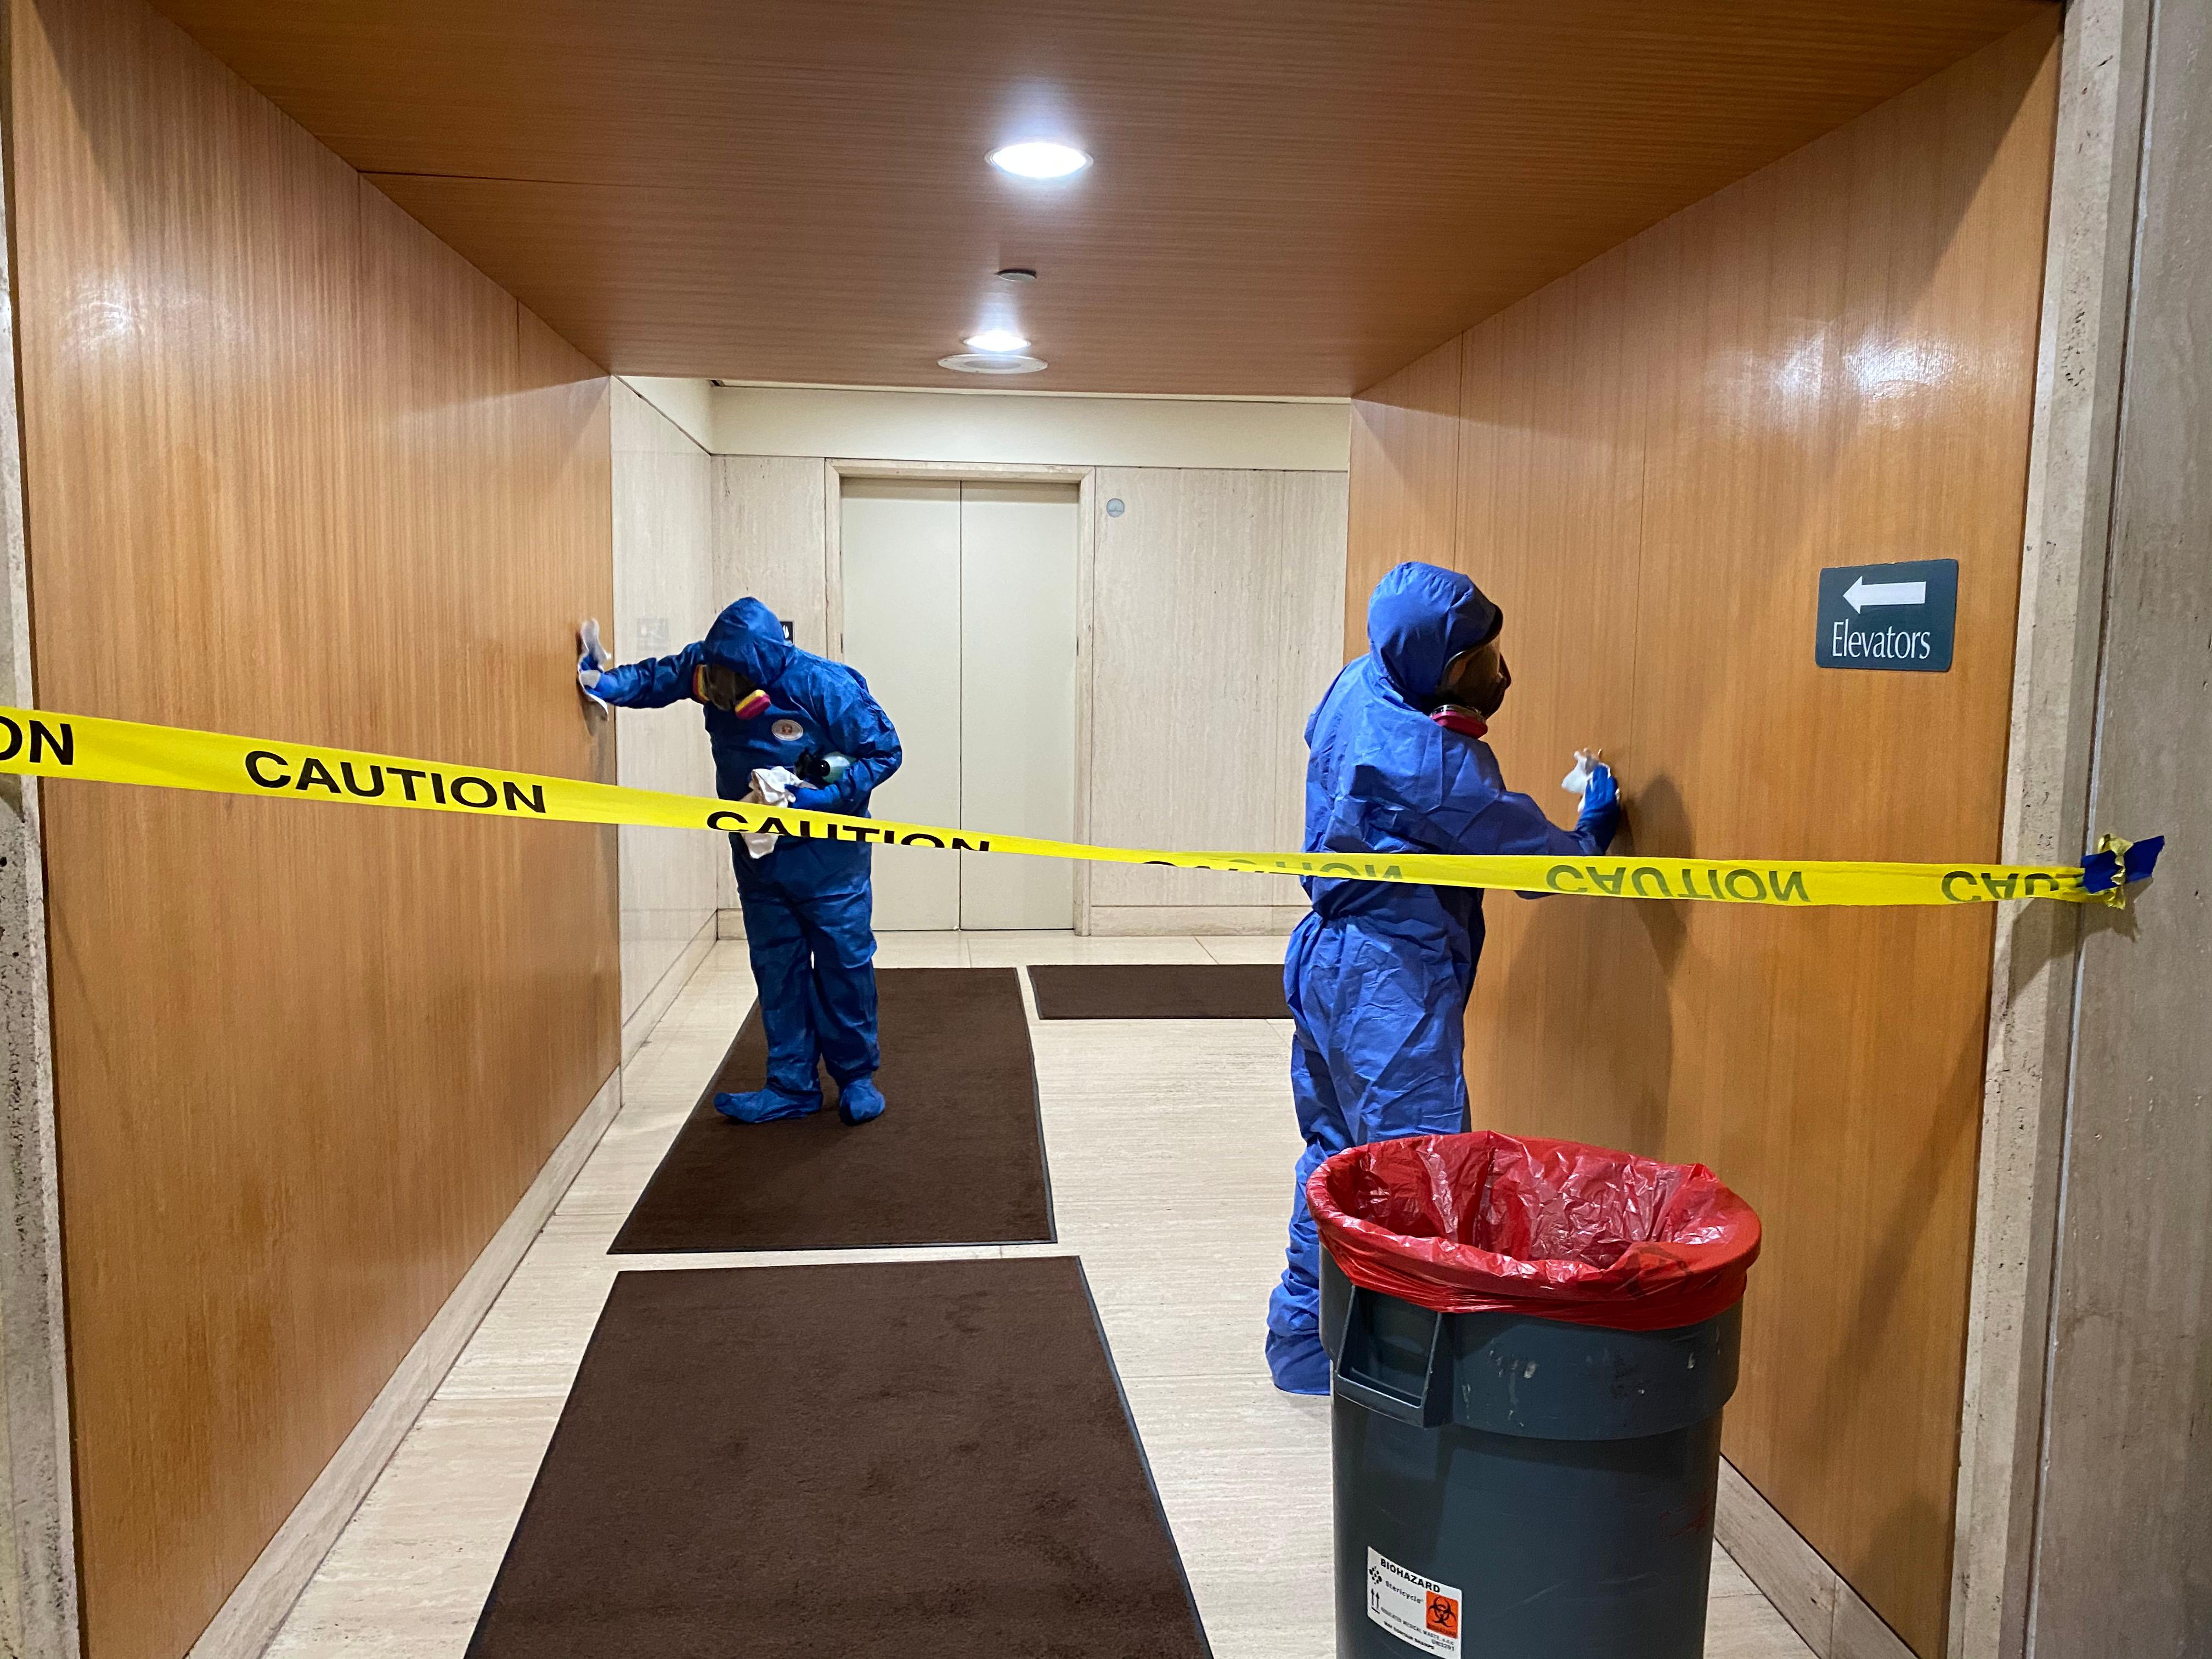 COVID-19 Cleanup disinfecting in lobby of commercial business complex